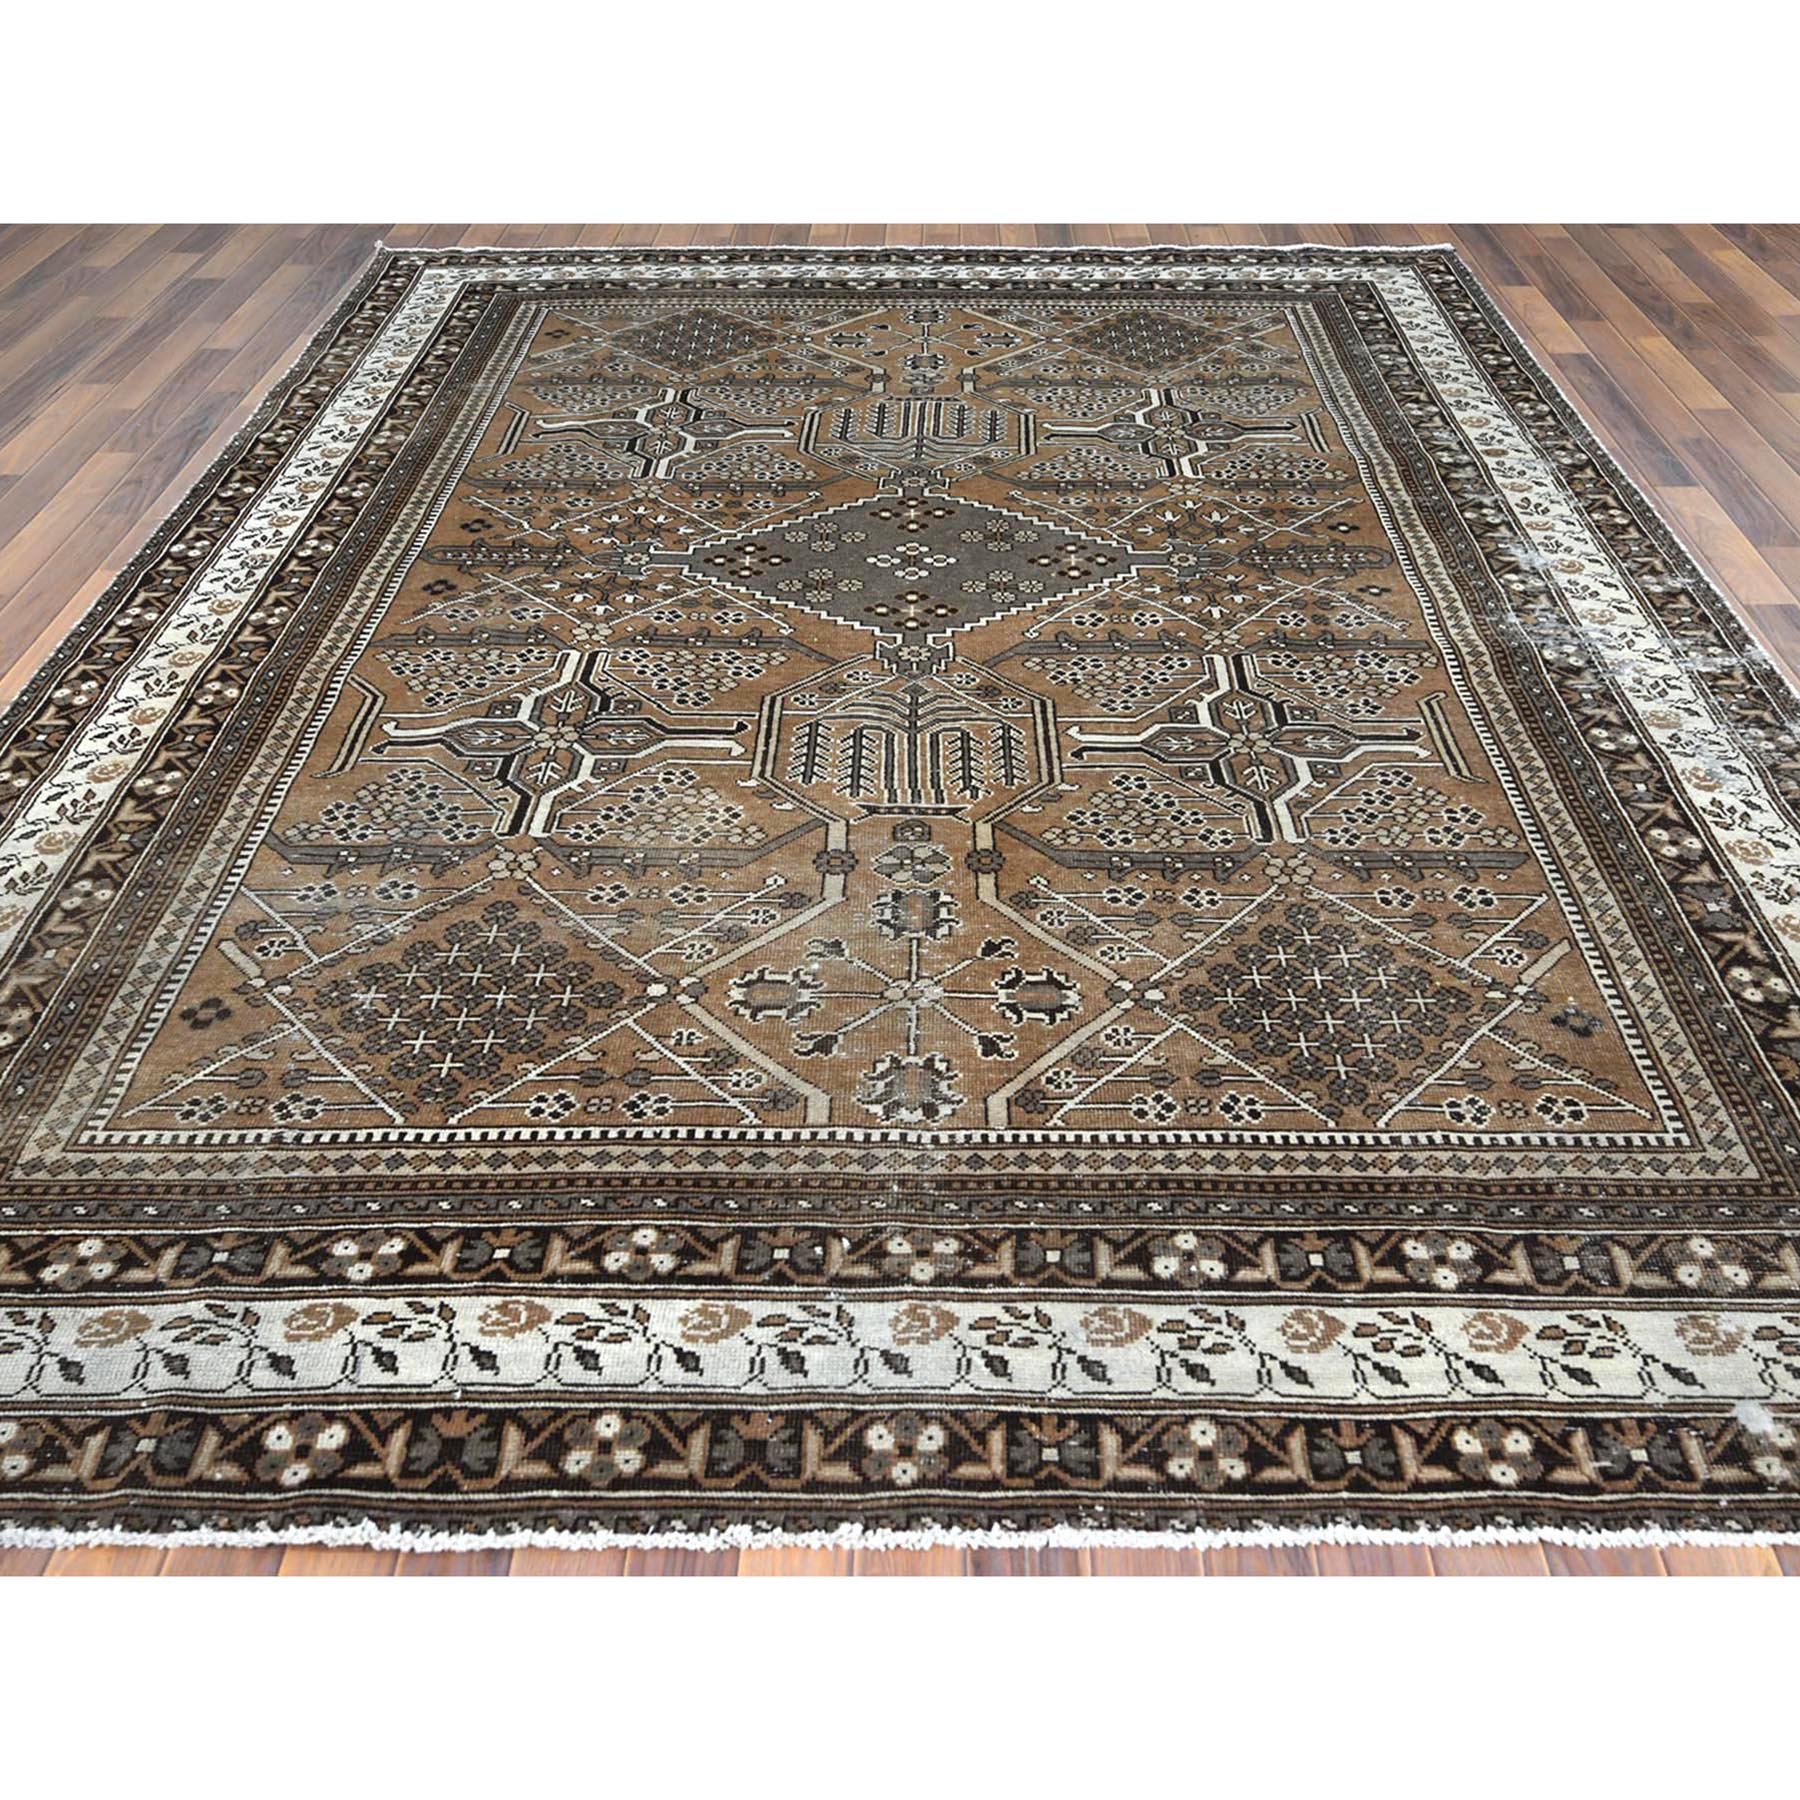 8'4"x11' Mocha Brown, Vintage Persian Bakhtiar with Undyed Natural Wool, Sheared Low, Distressed Look, Worn Down, Clean, Hand Woven, Oriental Rug 